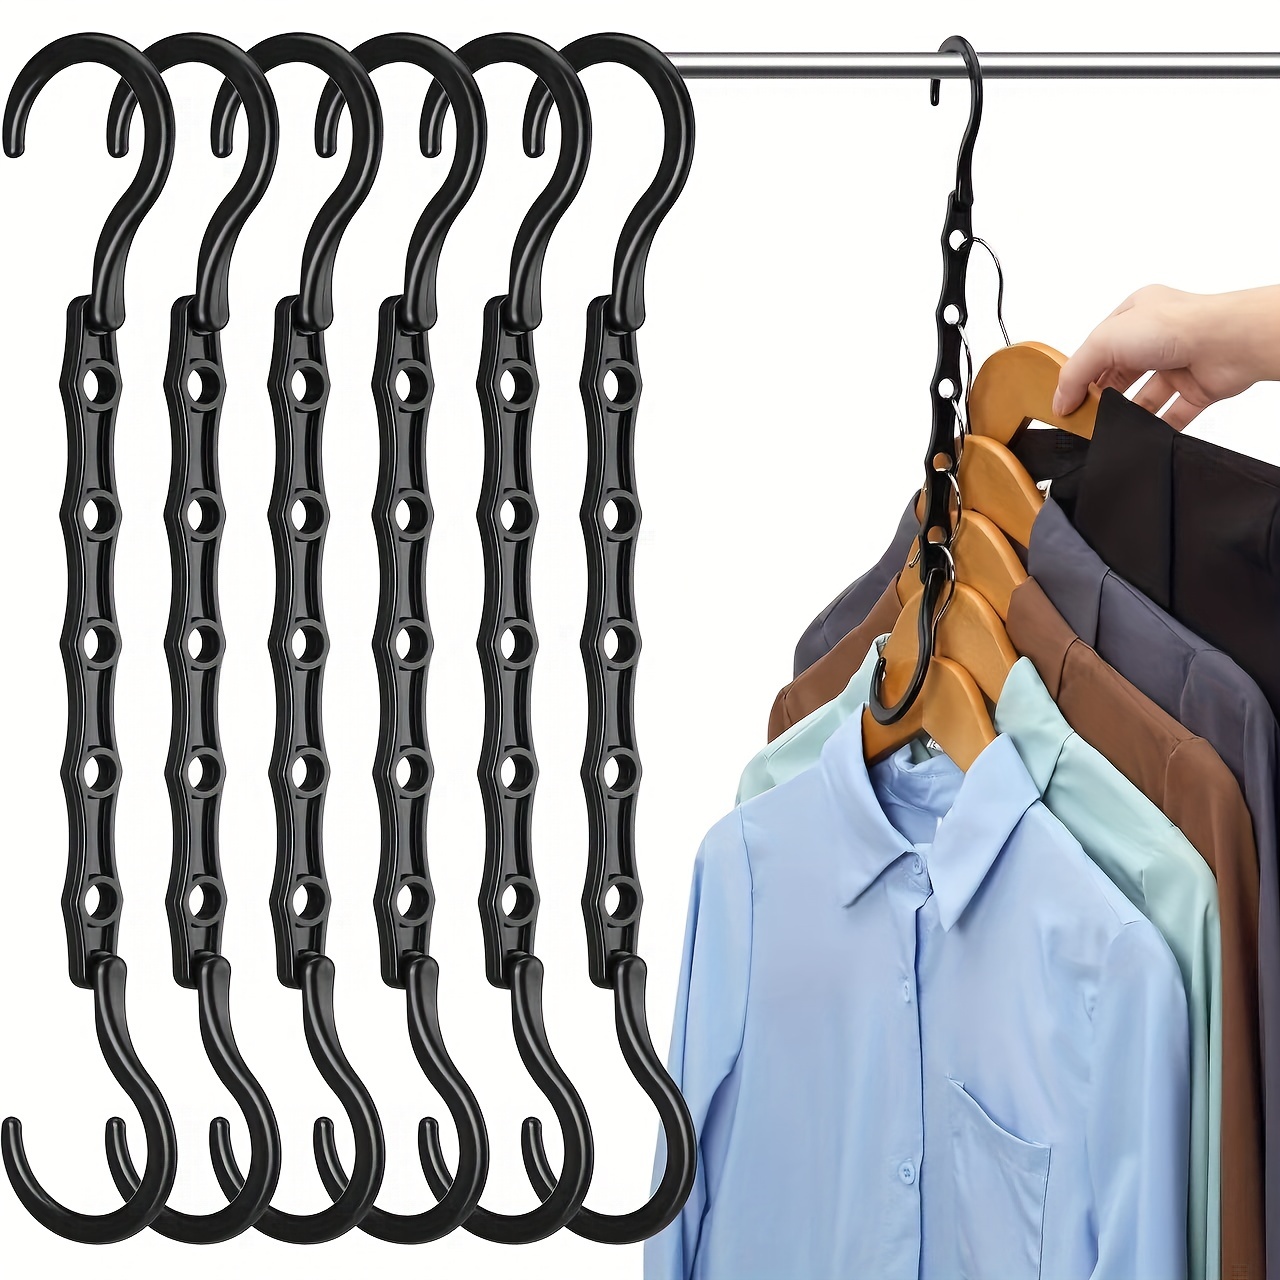 Space Saving Hanger Hooks, Clothes Hanger Connector Hooks, AS-SEEN-ON-TV,  Ultra- Premium Hanger Extender Clips,Heavy Duty Cascade Hangers to Create  Up to 5X More Closet Space,Fits all Types of Hangers 